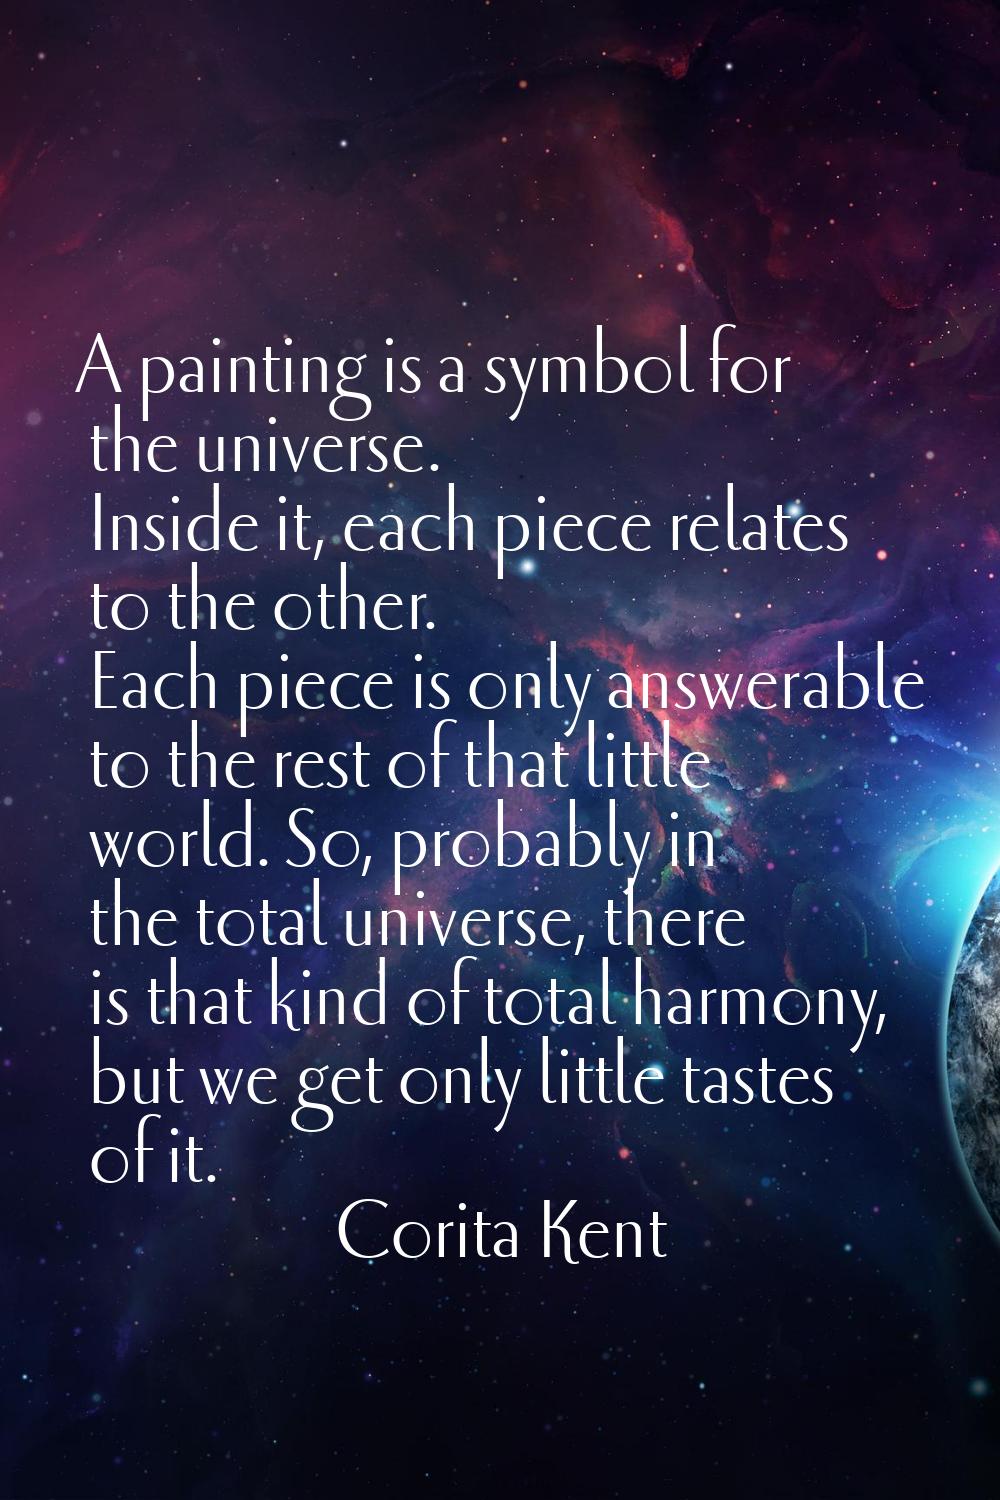 A painting is a symbol for the universe. Inside it, each piece relates to the other. Each piece is 